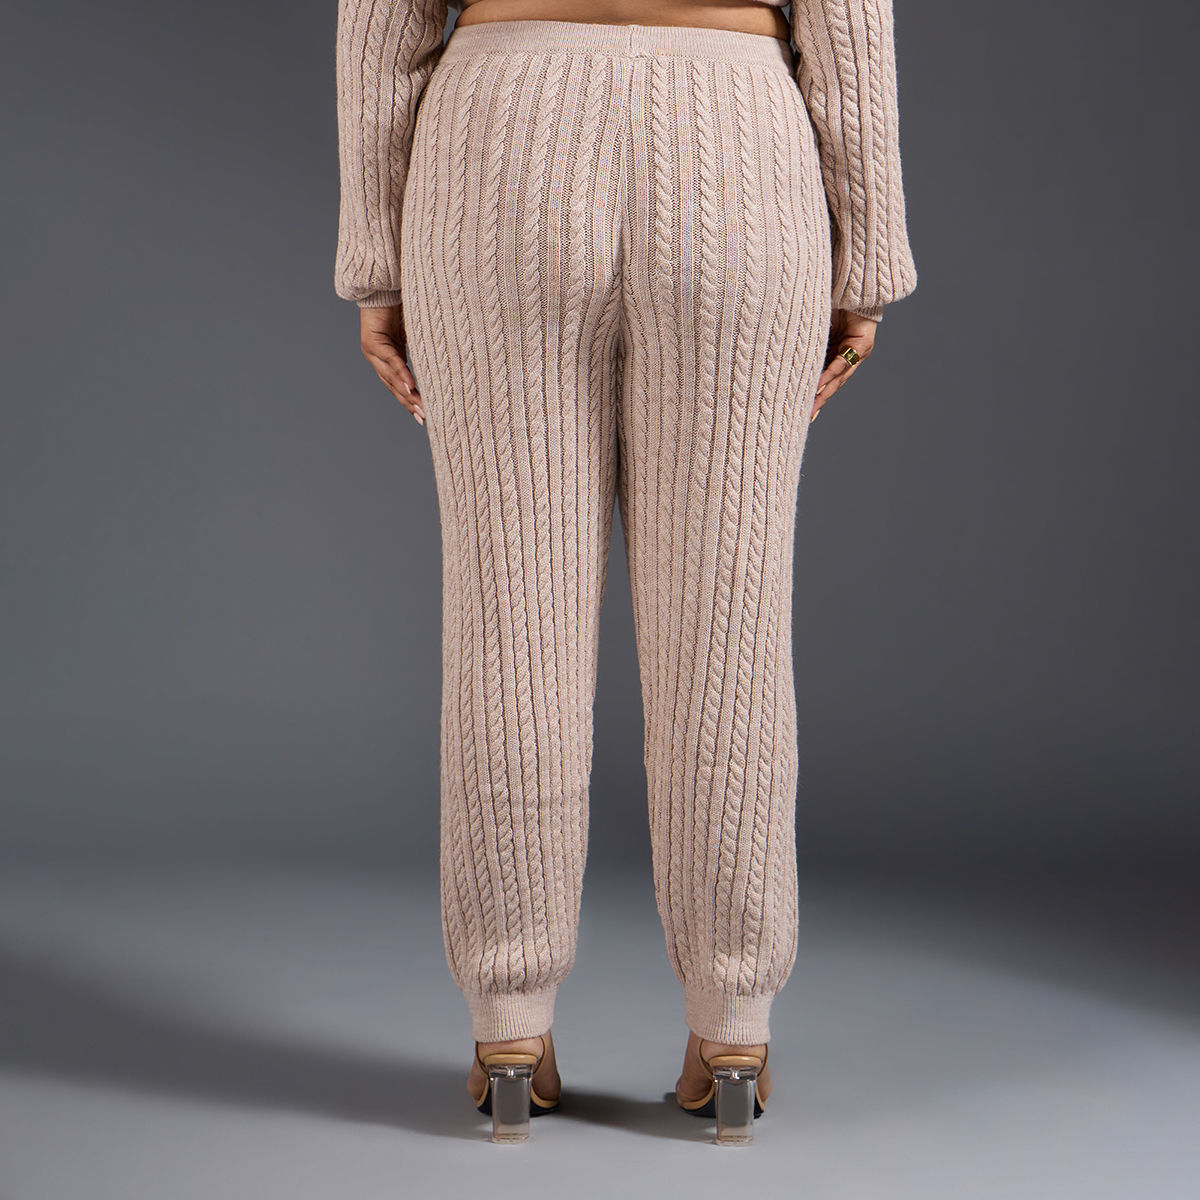 Chunky Knit Sweater and Pants Set Two Piece Loungewear Pajama Co ord –  sunifty